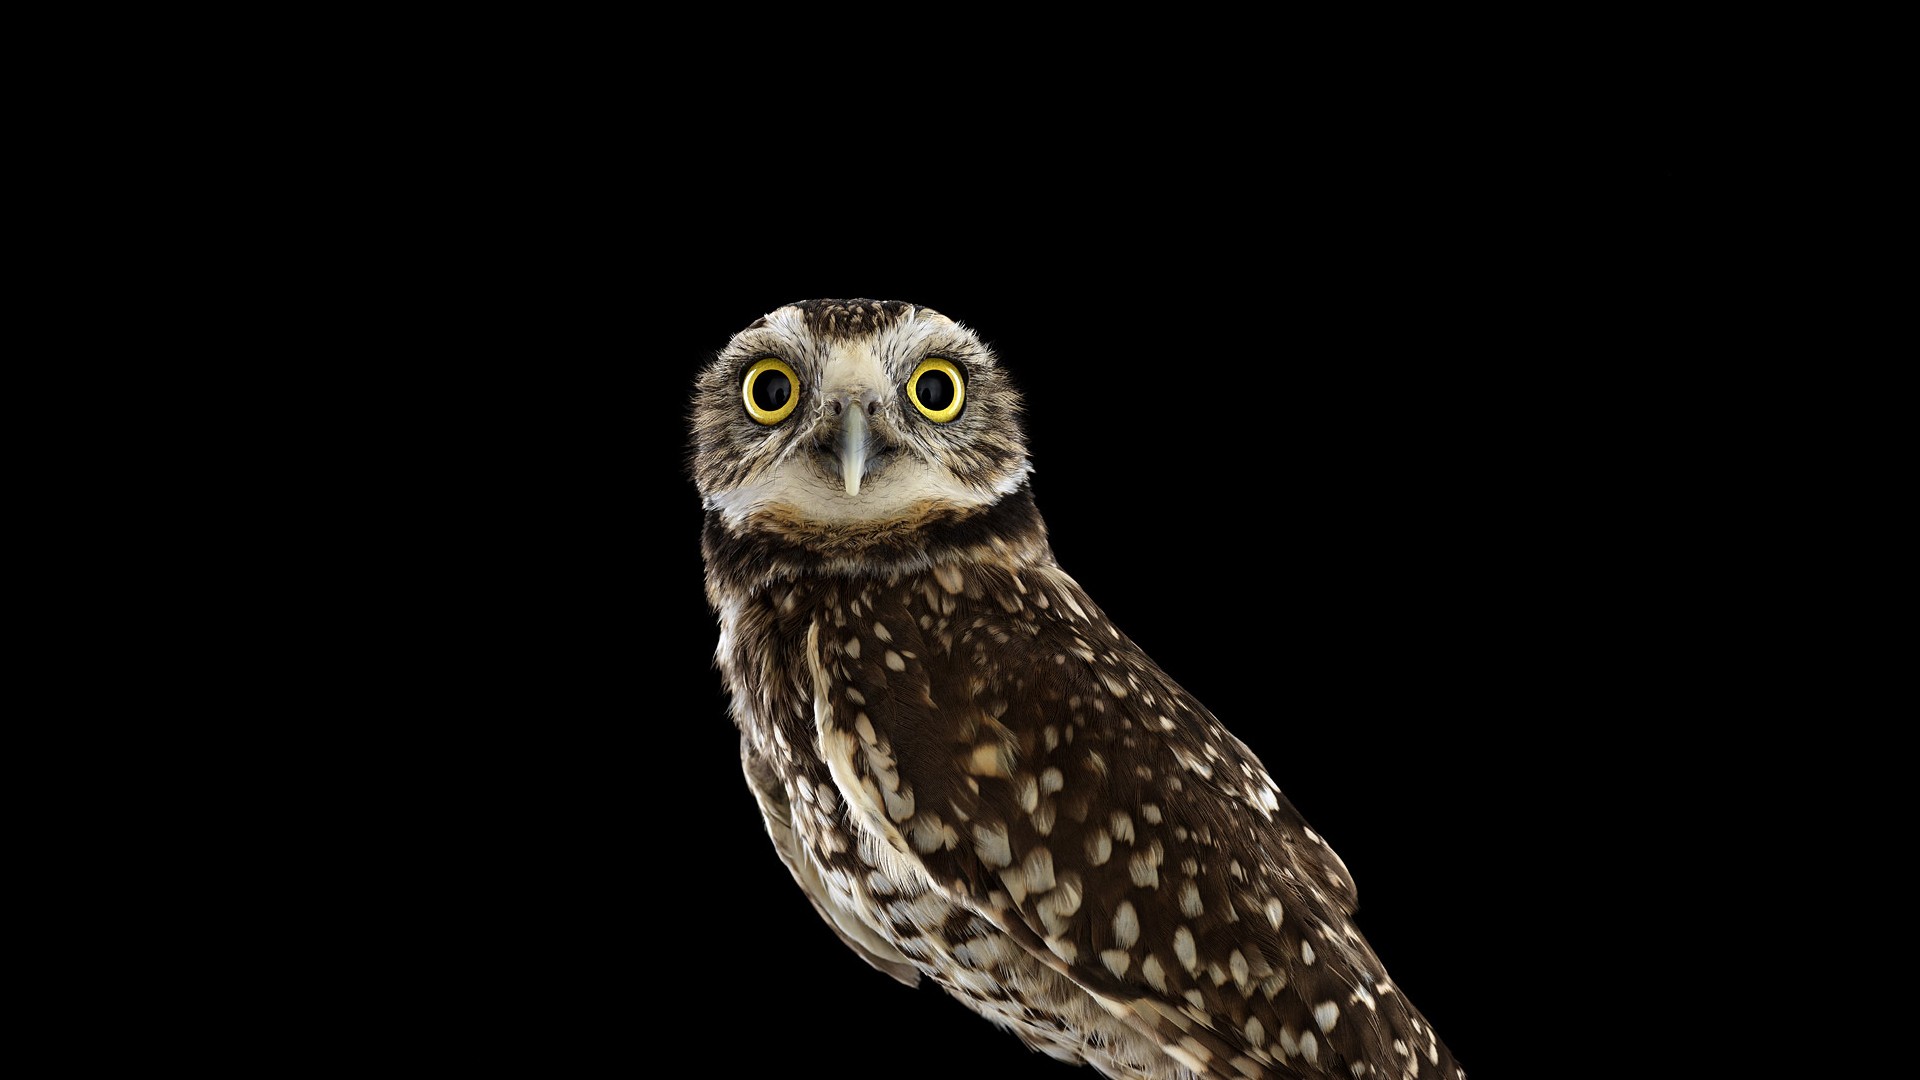 General 1920x1080 photography animals birds owl simple background black background